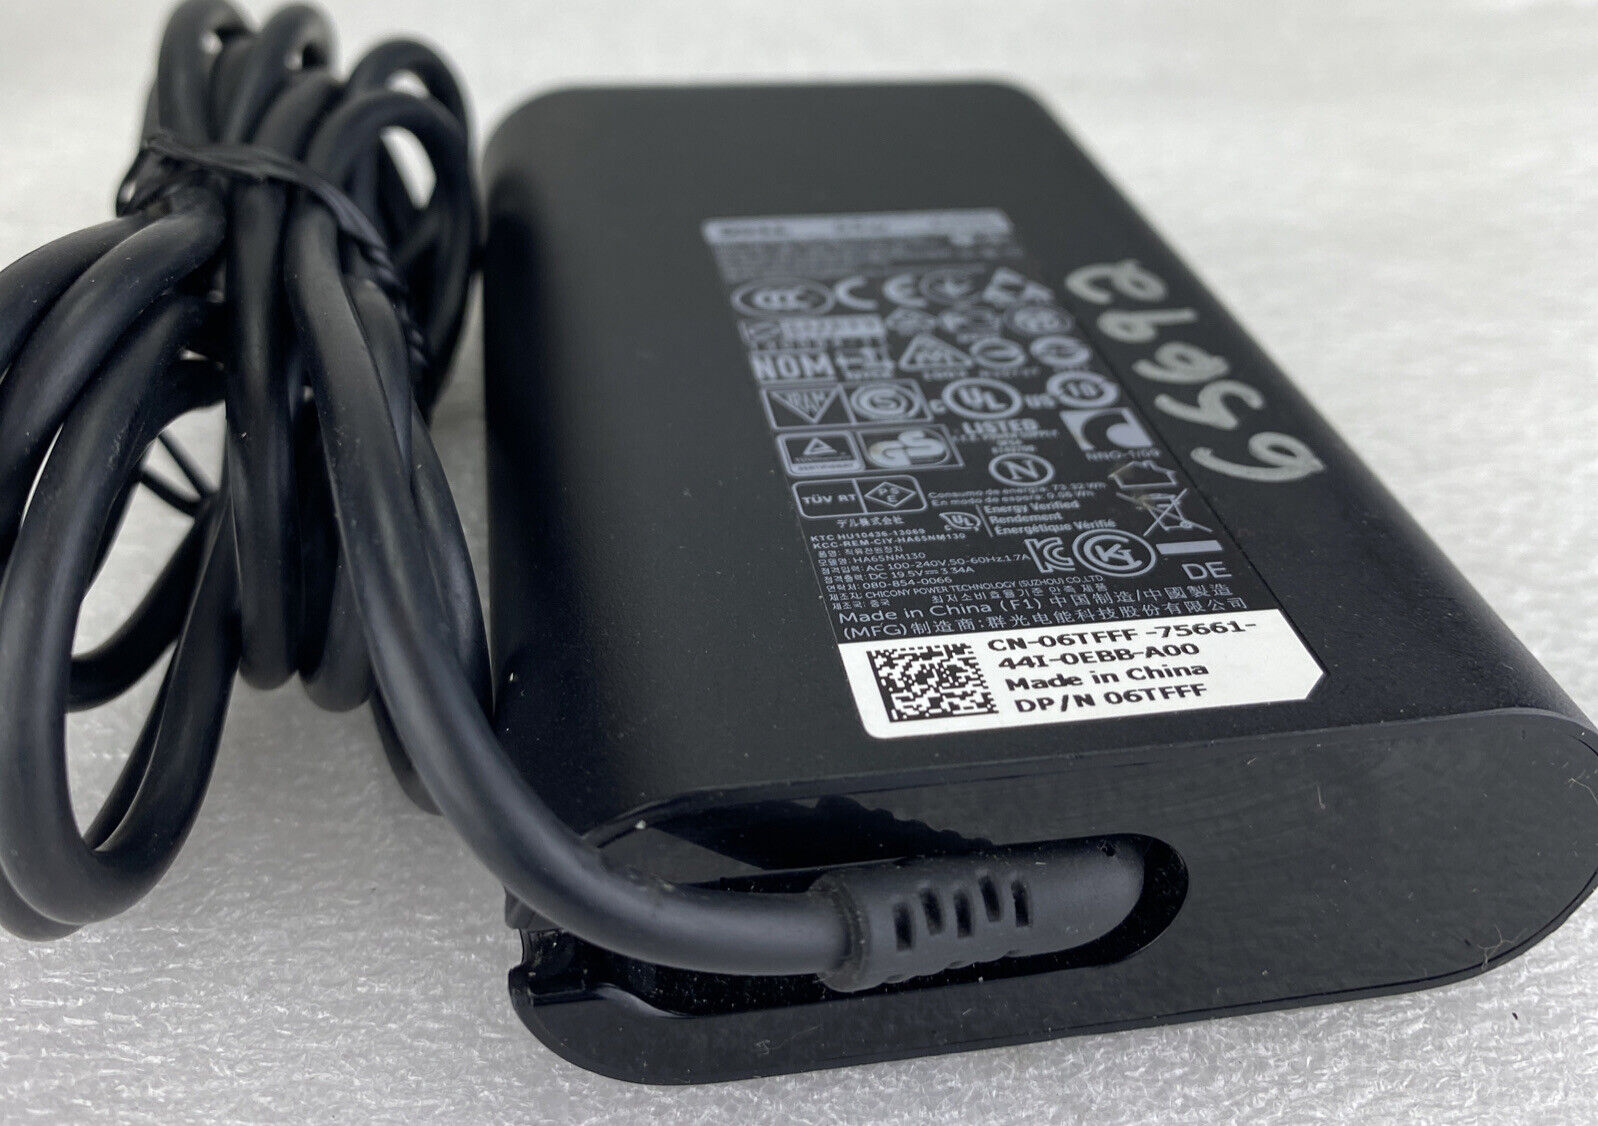 Dell 06TFFF AC adapter charger power supply HA65NM130 19.5V 3.34A 65W